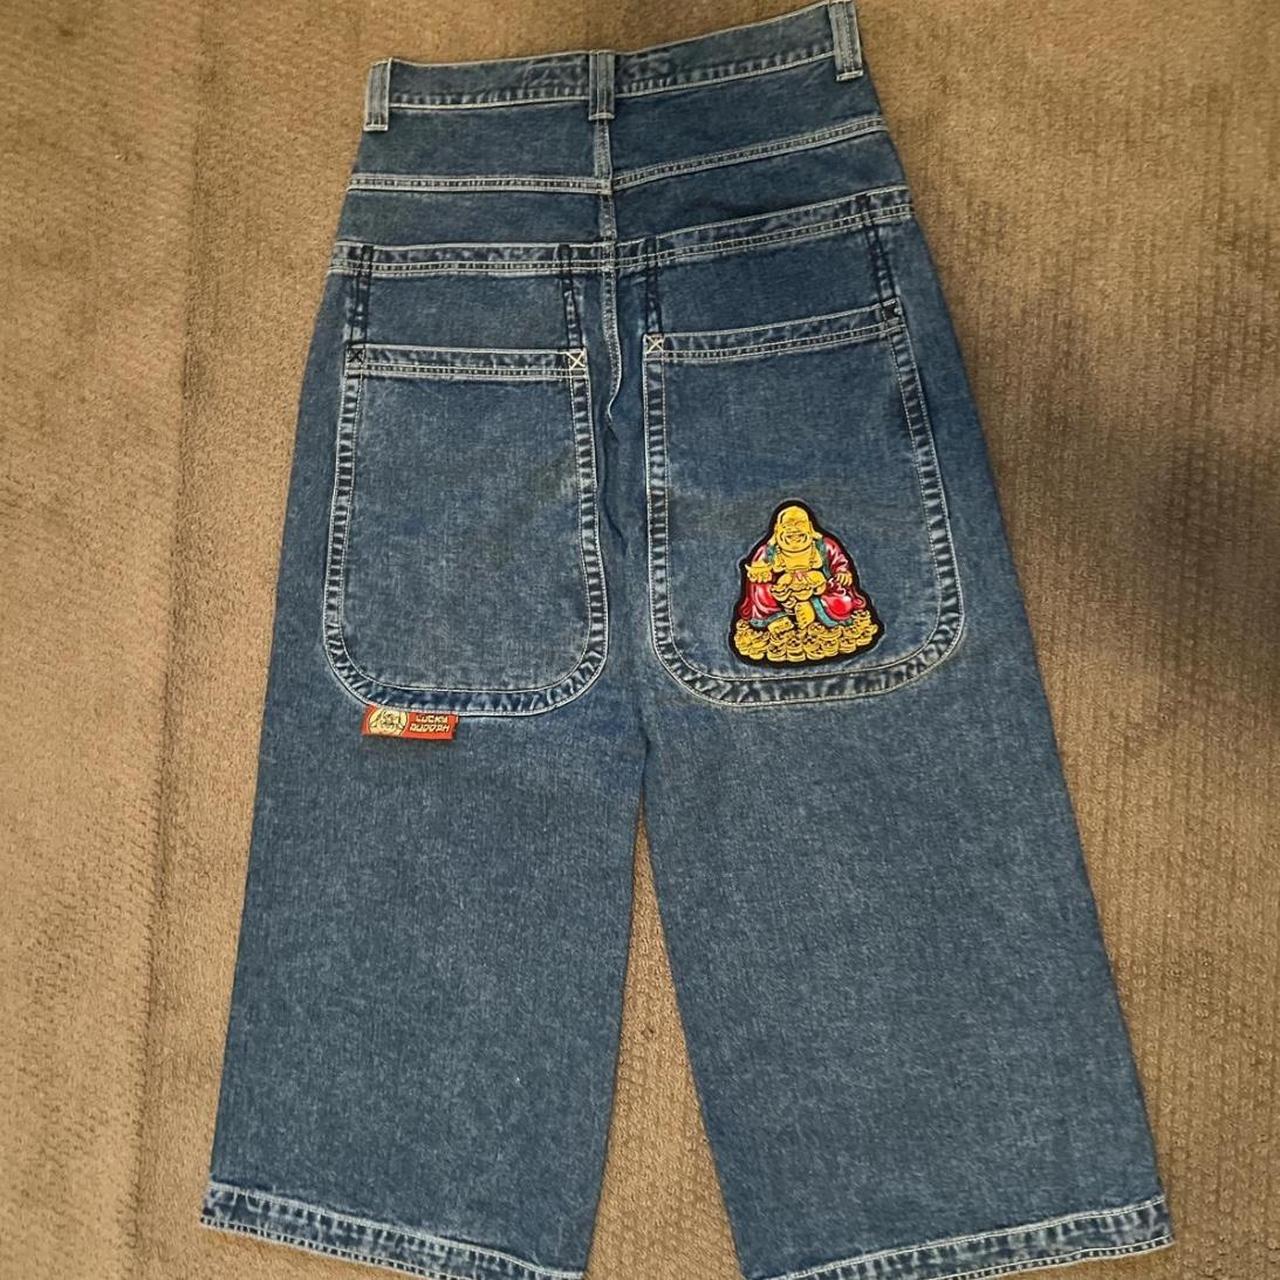 JNCO LUCKY buddha‼️(size 34/31) these are in perfect... - Depop